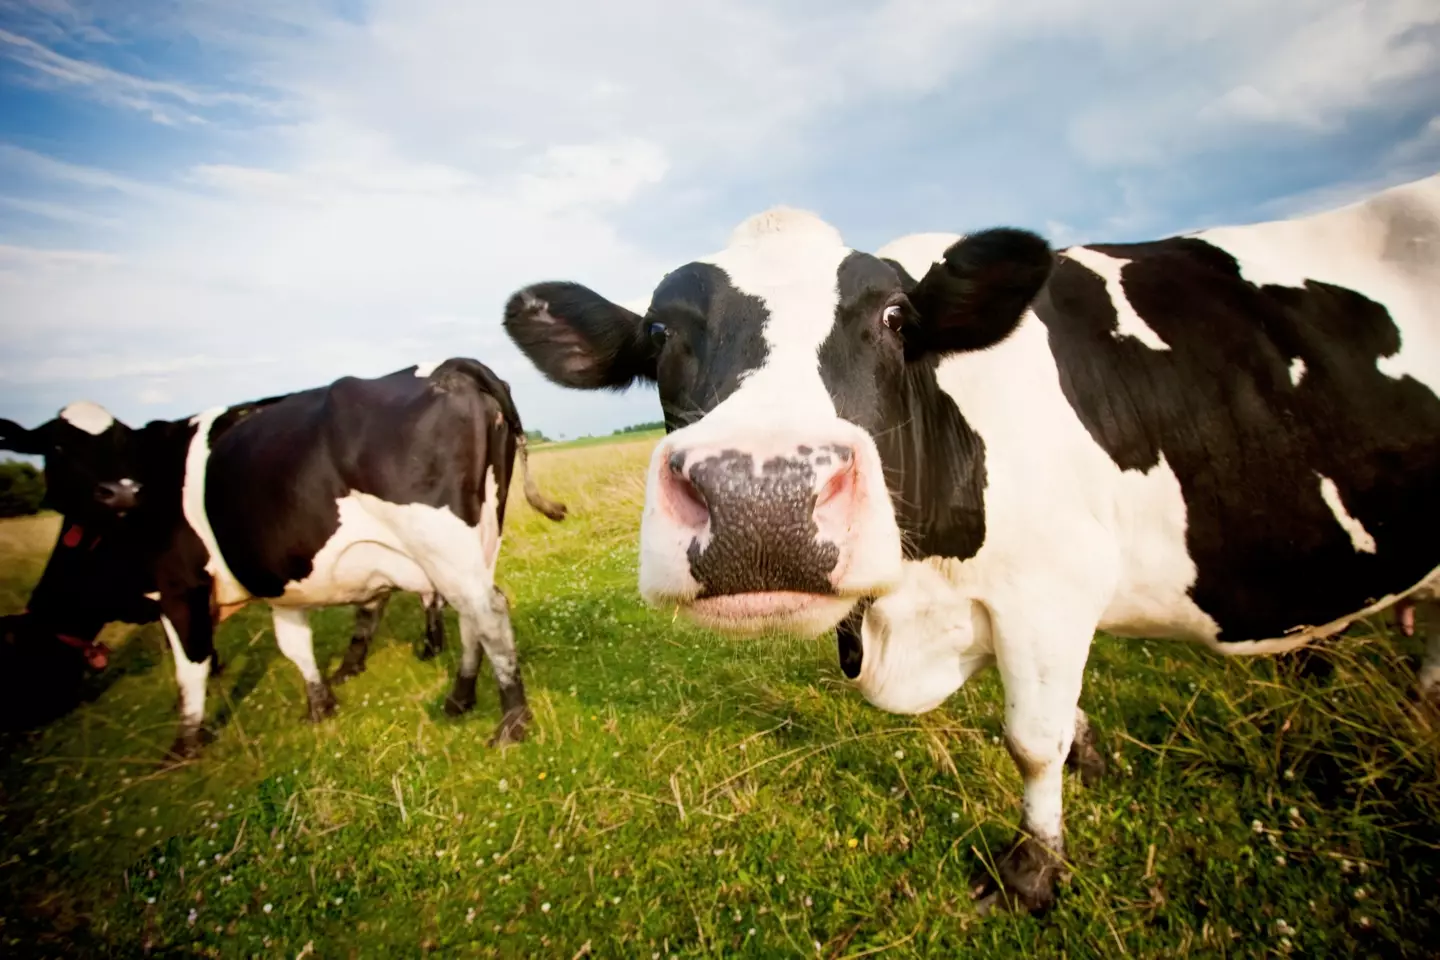 Bill Gates has also heavily invested in green tech to reduce methane emissions from cows.